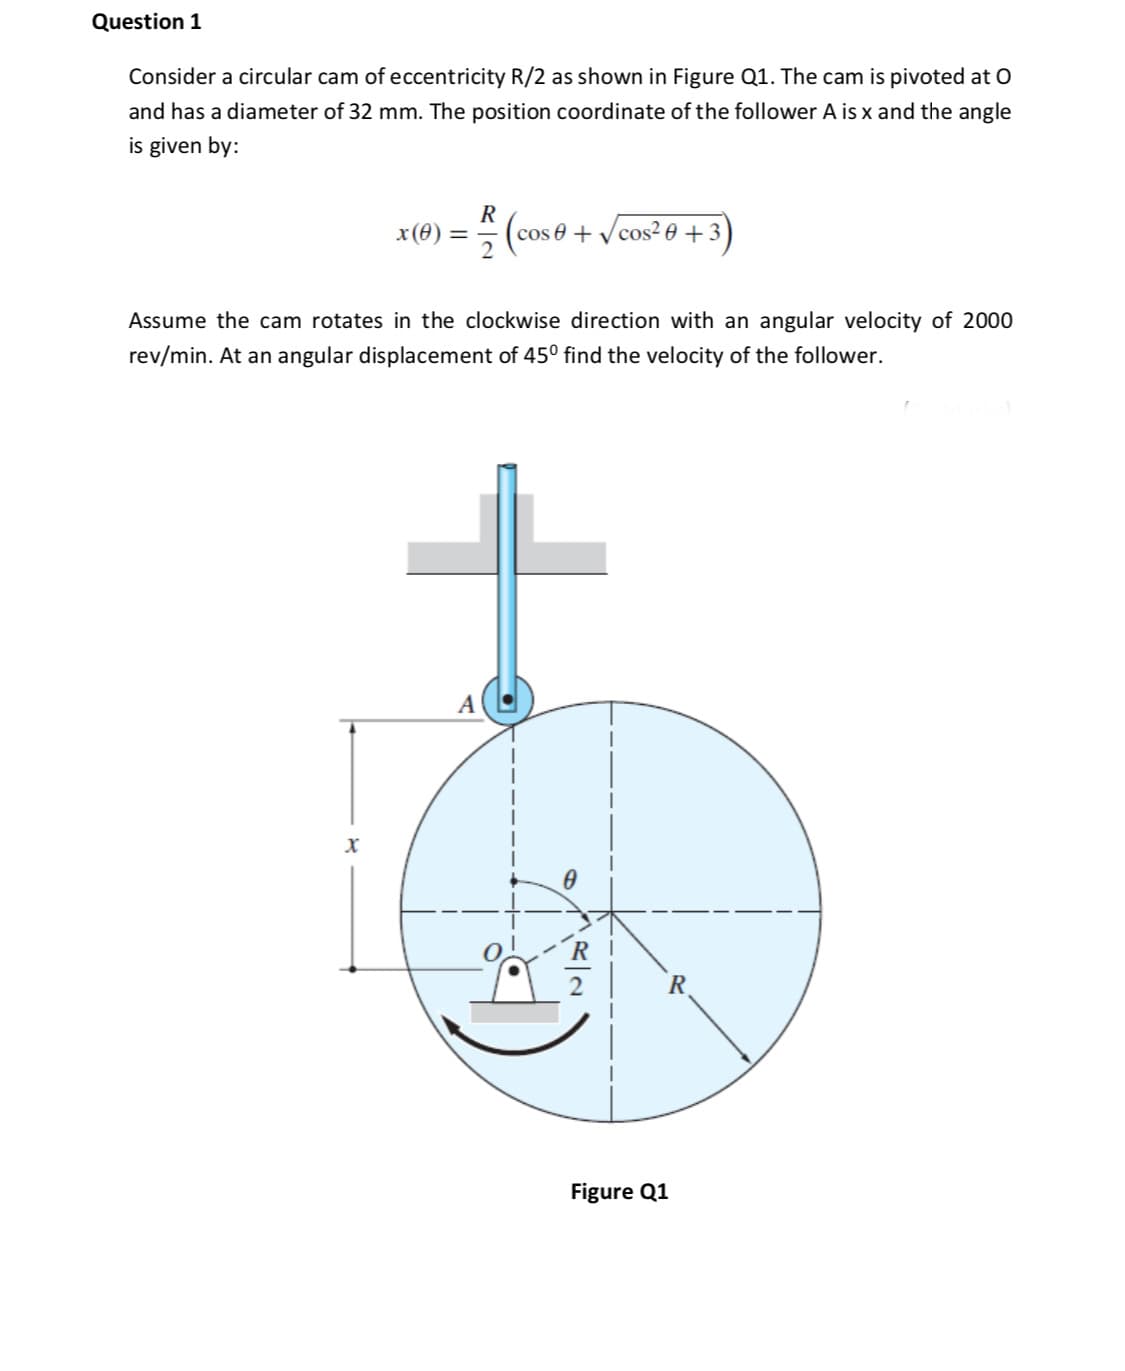 Consider a circular cam of eccentricity R/2 as shown in Figure Q1. The cam is pivoted at O
and has a diameter of 32 mm. The position coordinate of the follower A is x and the angle
is given by:
R
(cos 0+
V cos? 0 + 3)
x(0)
Assume the cam rotates in the clockwise direction with an angular velocity of 2000
rev/min. At an angular displacement of 45° find the velocity of the follower.
A
